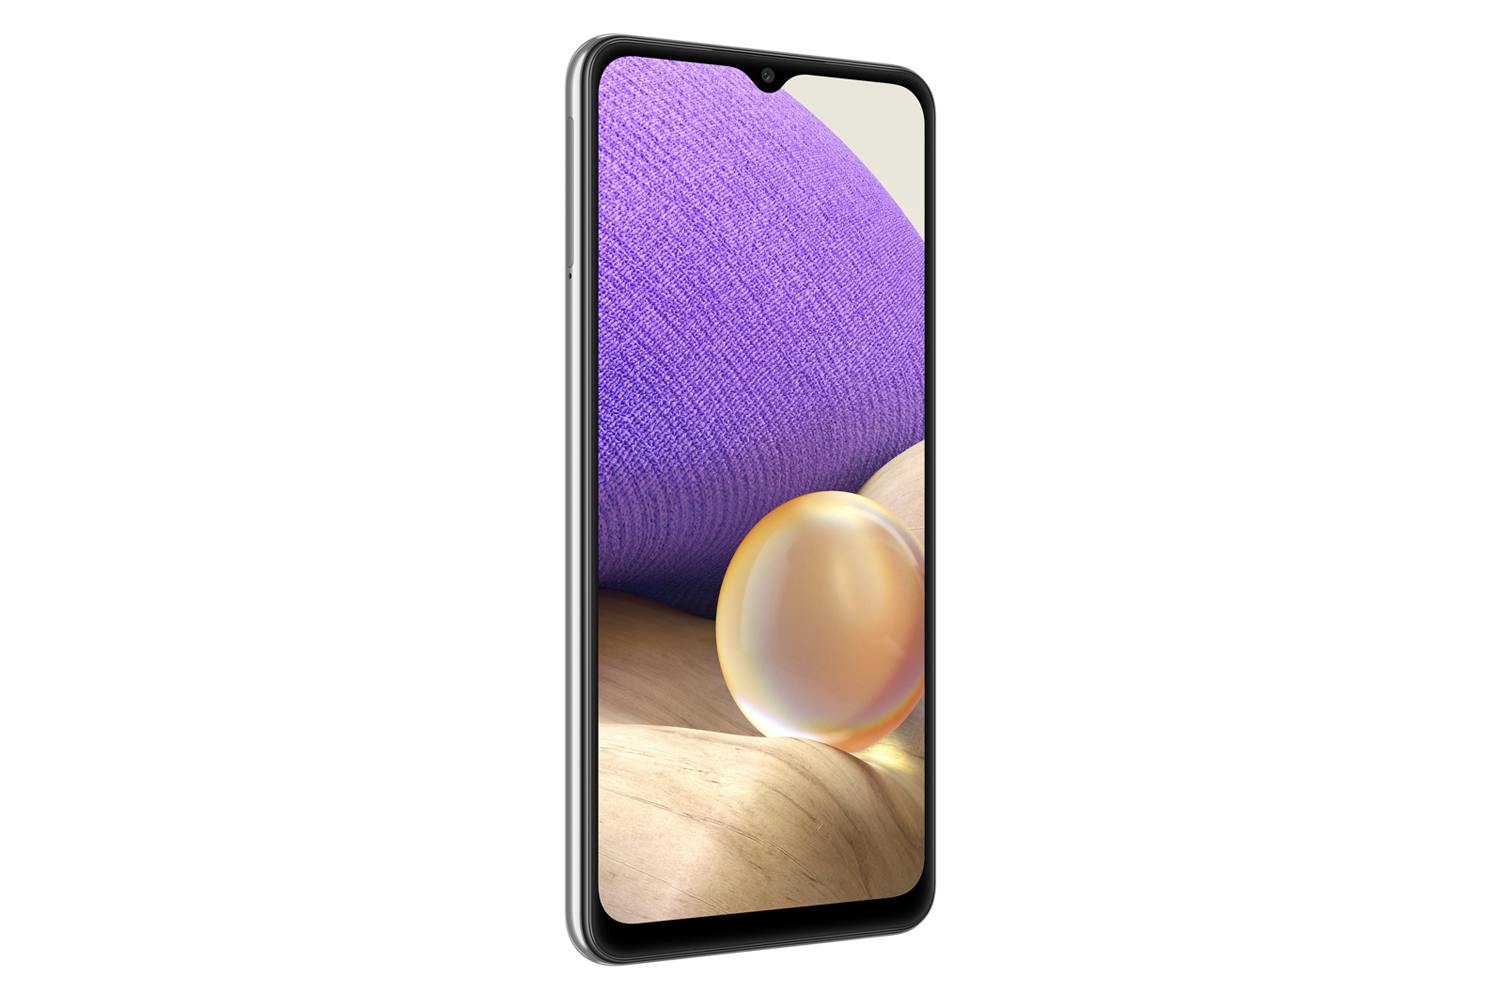 Samsung A32 5G 64GB Samsung Galaxy A32 is a mid-range 5G phone that offers  a 6.5-inch display, an octa-core processor with up to 64GB storage, and a  5000mAh battery. The rear camera